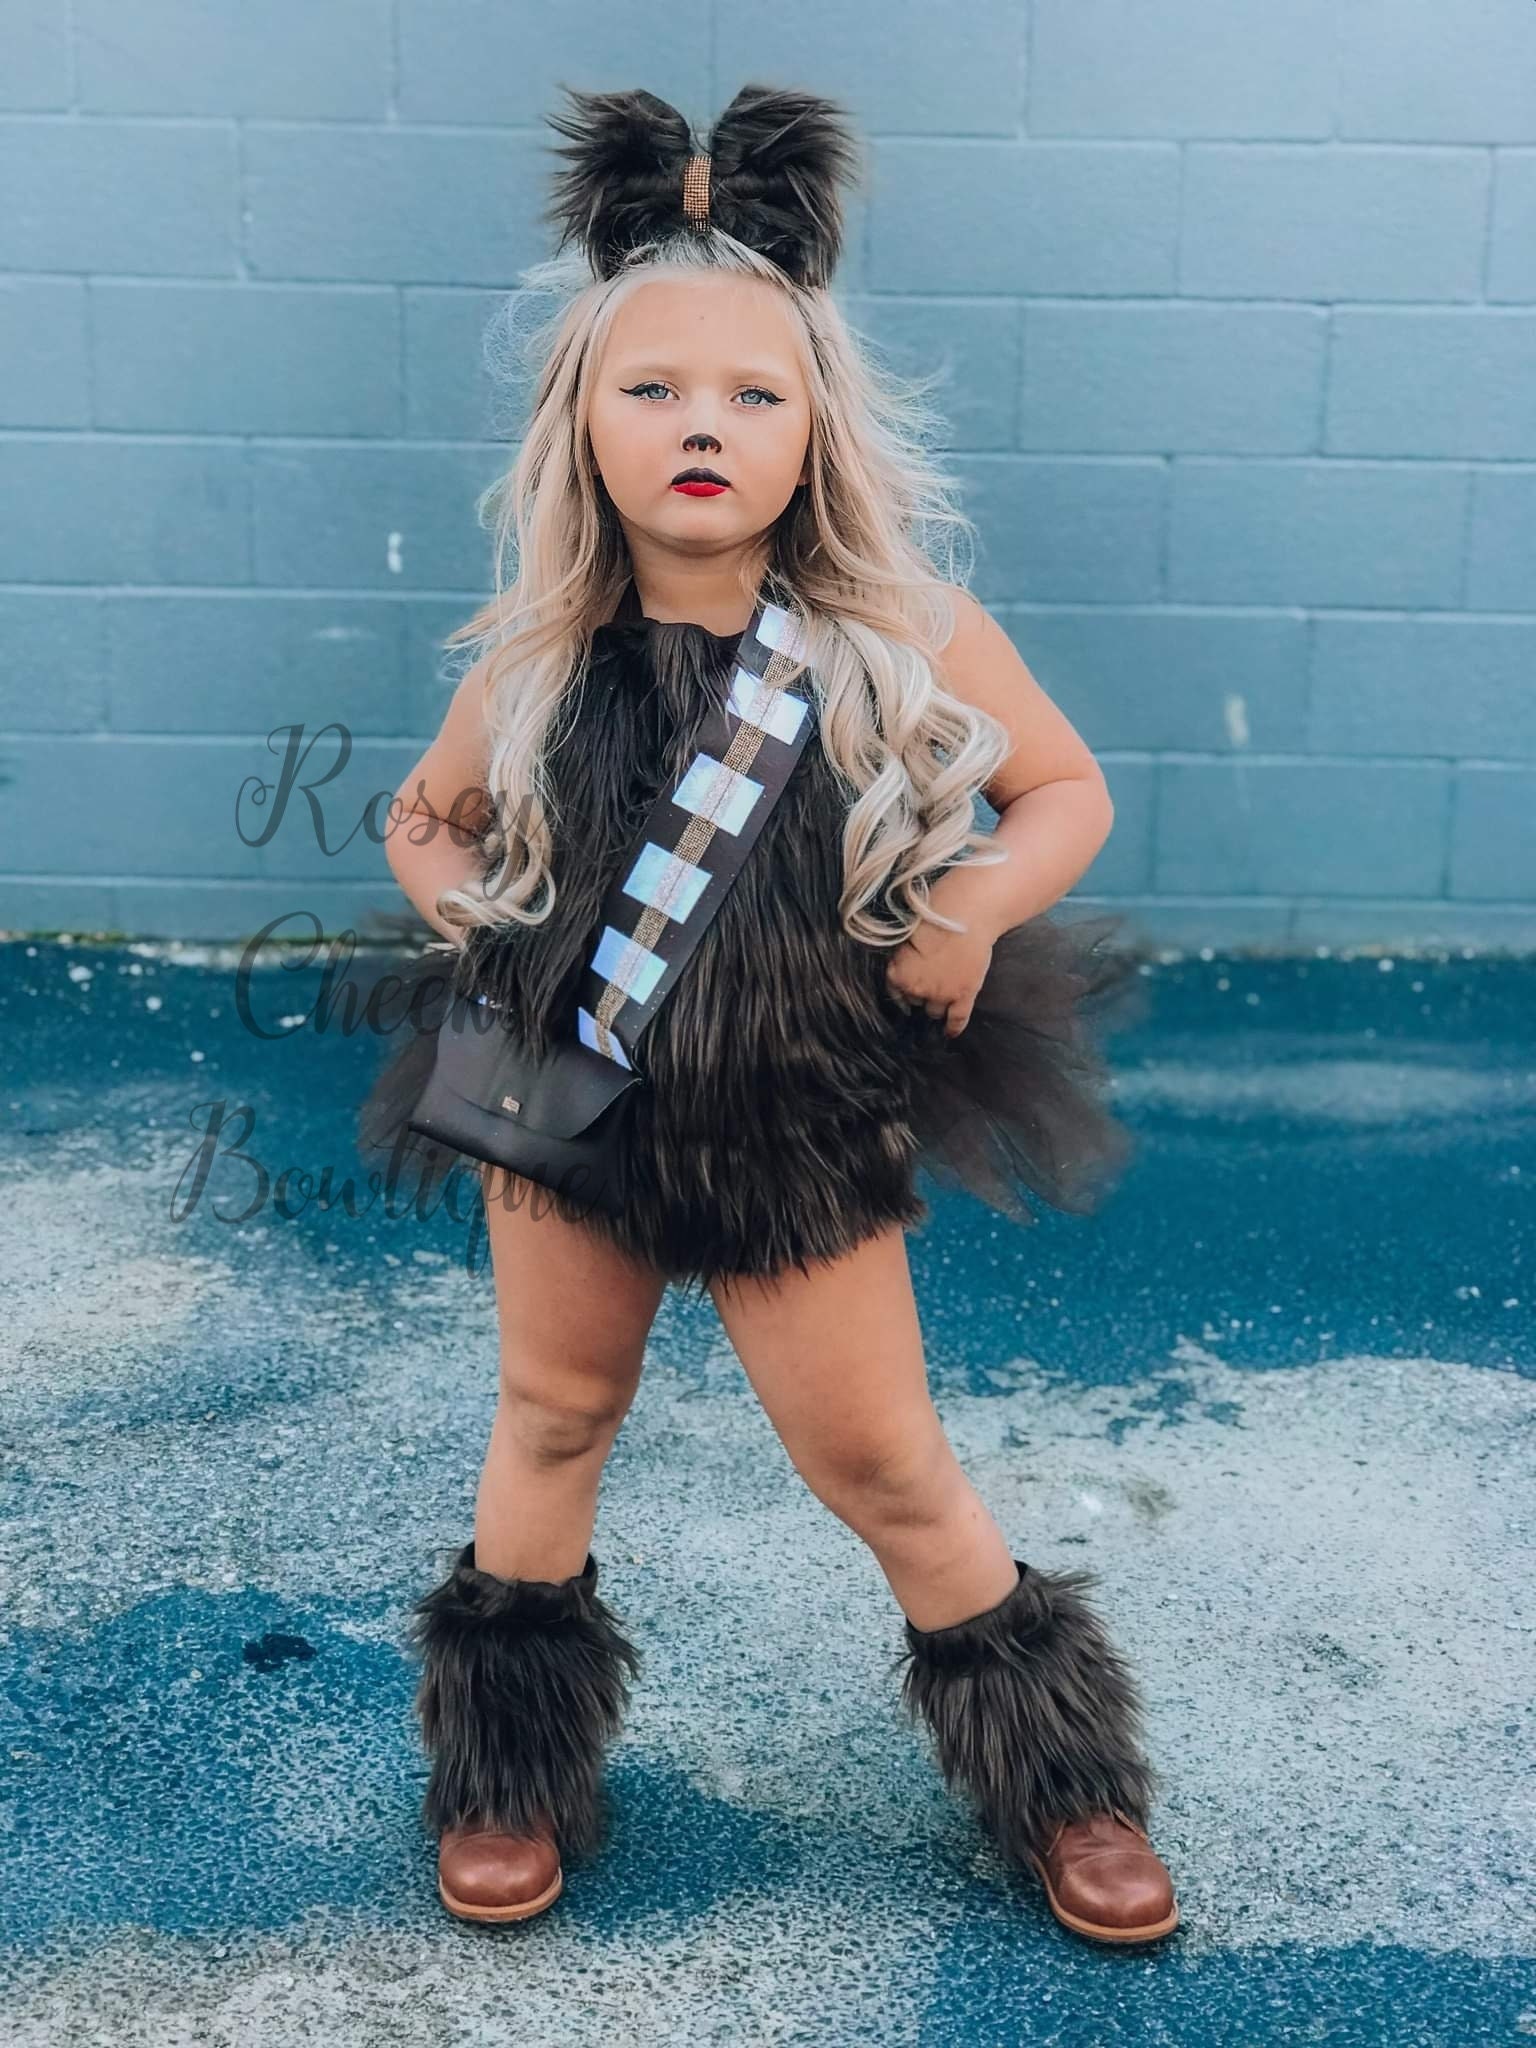 Chewbacca Star Wars Costume Photo Shoot Pageant Baby Toddler